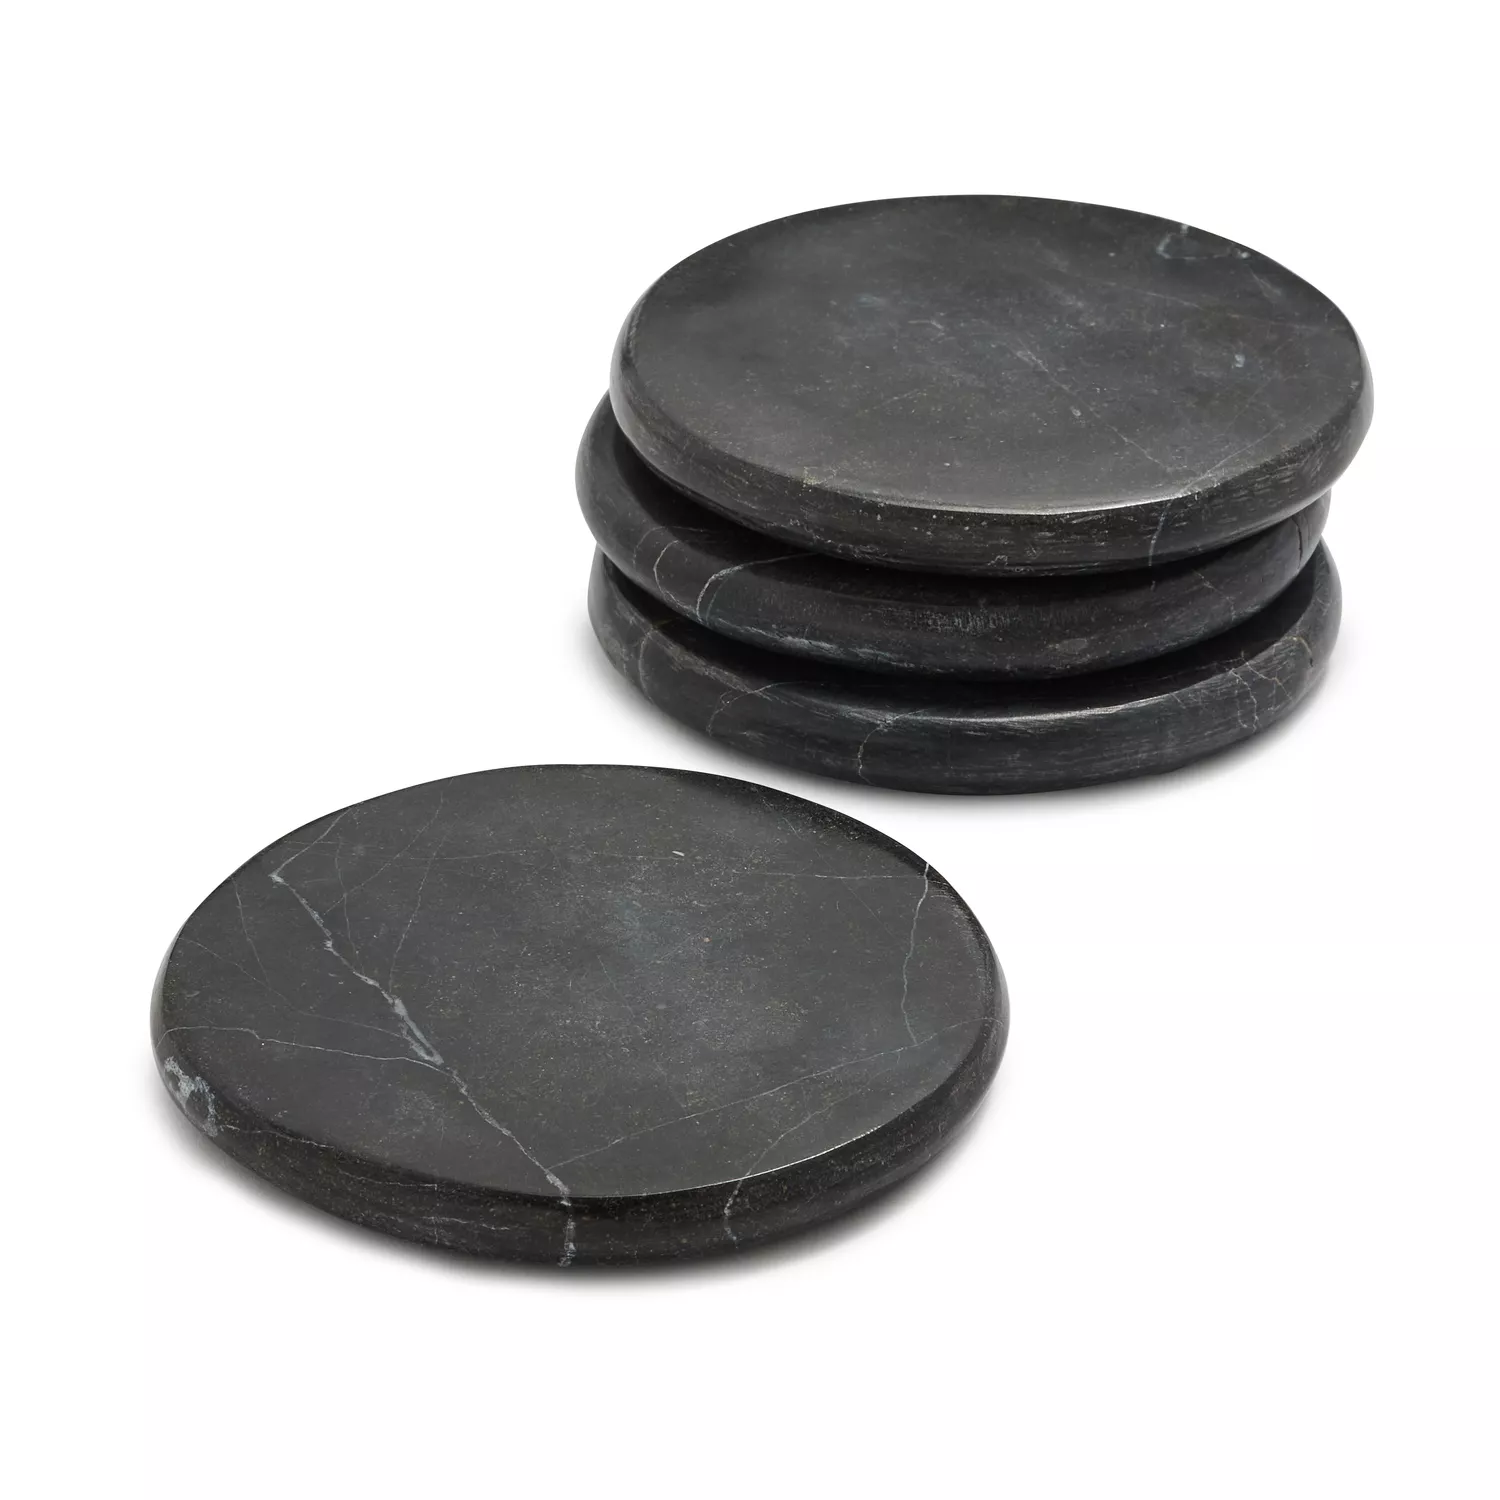 Eclisse Black & White Marble Coasters - Set of 4 – Munde Home